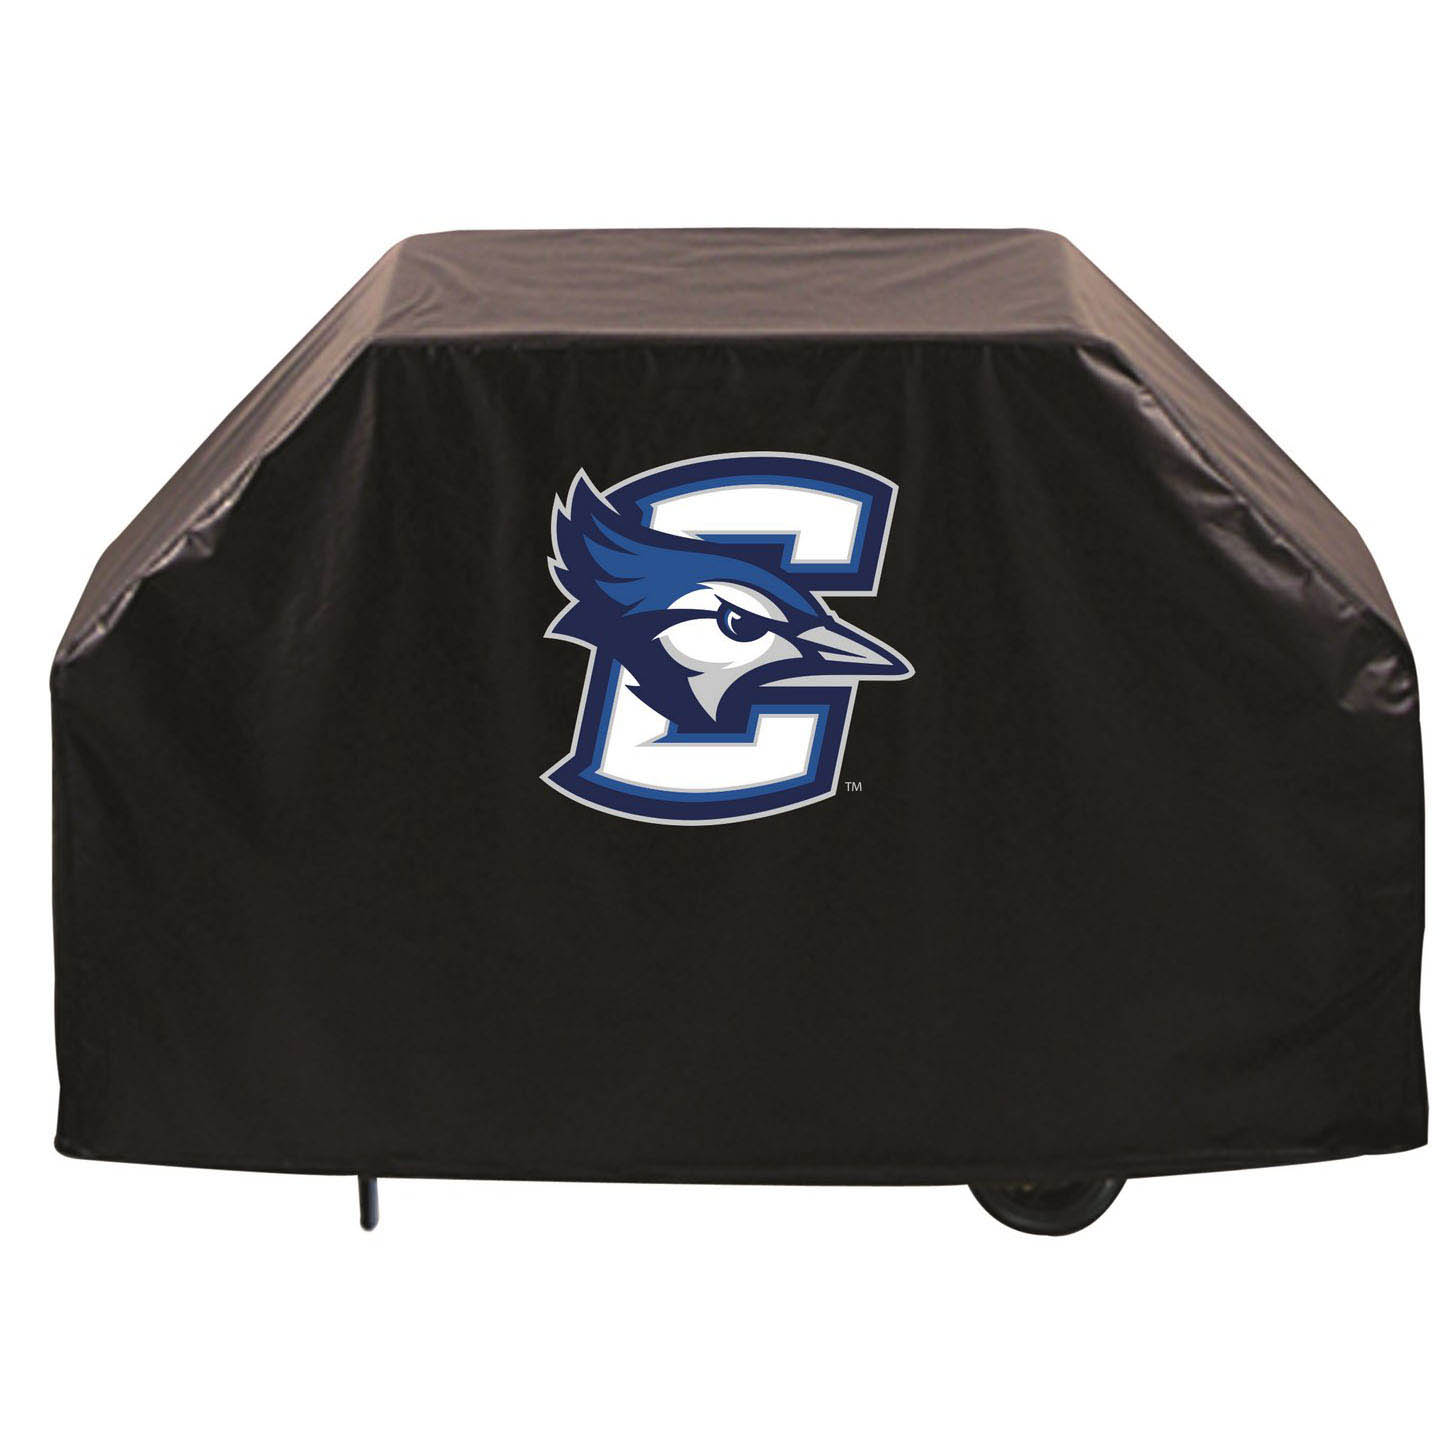 Creighton Grill Cover